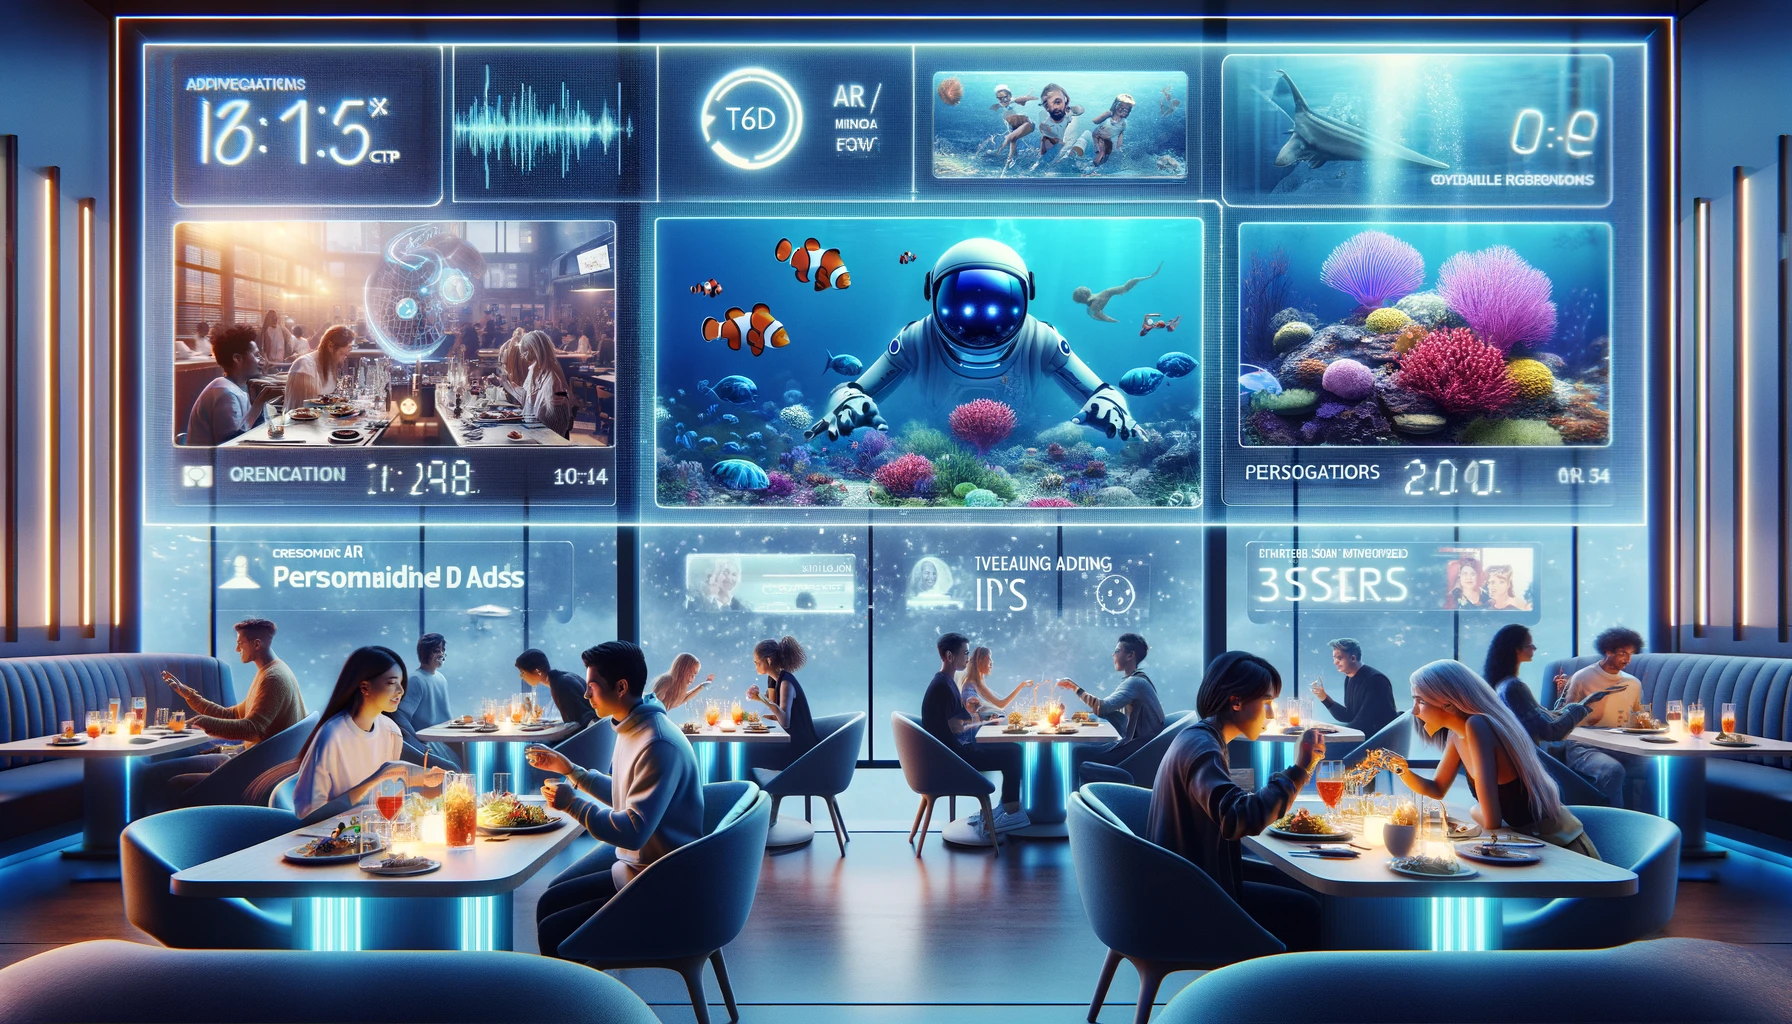 Futuristic restaurant scene with AR clothing, holographic displays, interactive TV screens, and a holographic trivia game, highlighting advanced dining technology.